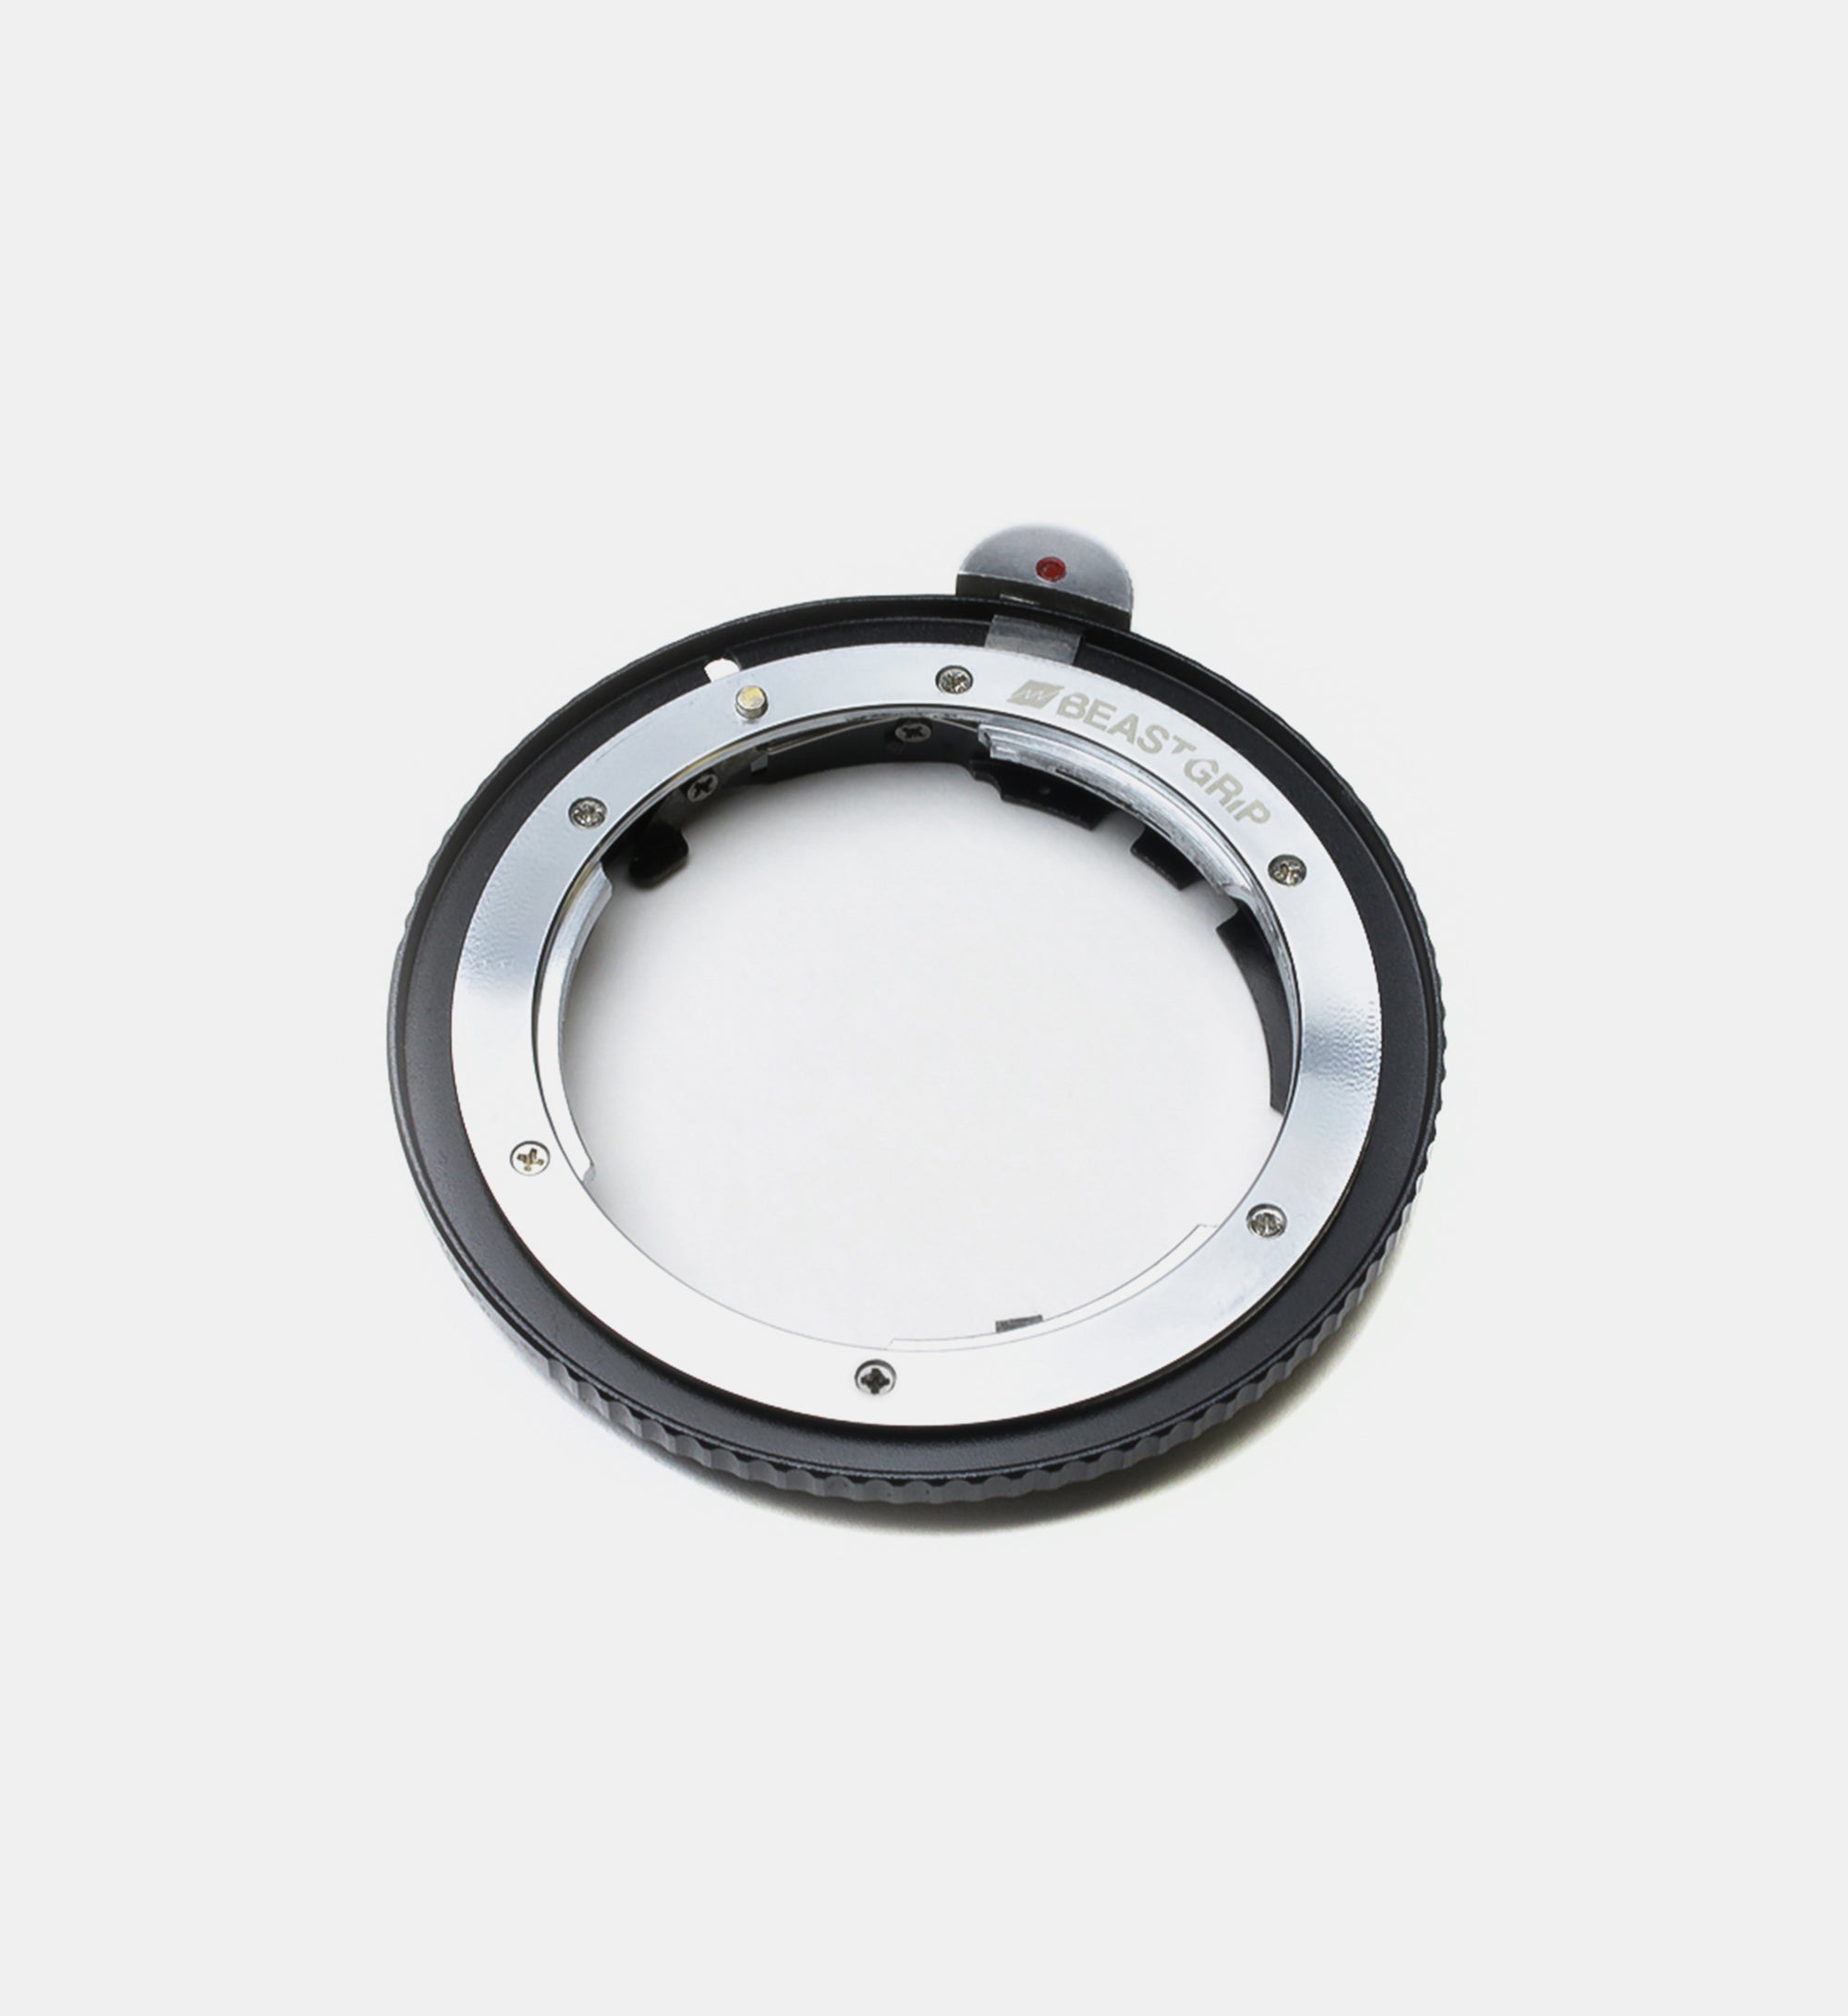 Buy Festnight NF-NEX Lens Mount Adapter Ring with Aperture Dial for Nikon  G/DX/F/AI/S/D Type Lens to use for Sony E-Mount NEX Camera 3 / 3N / 5N / 5R  / 7 /